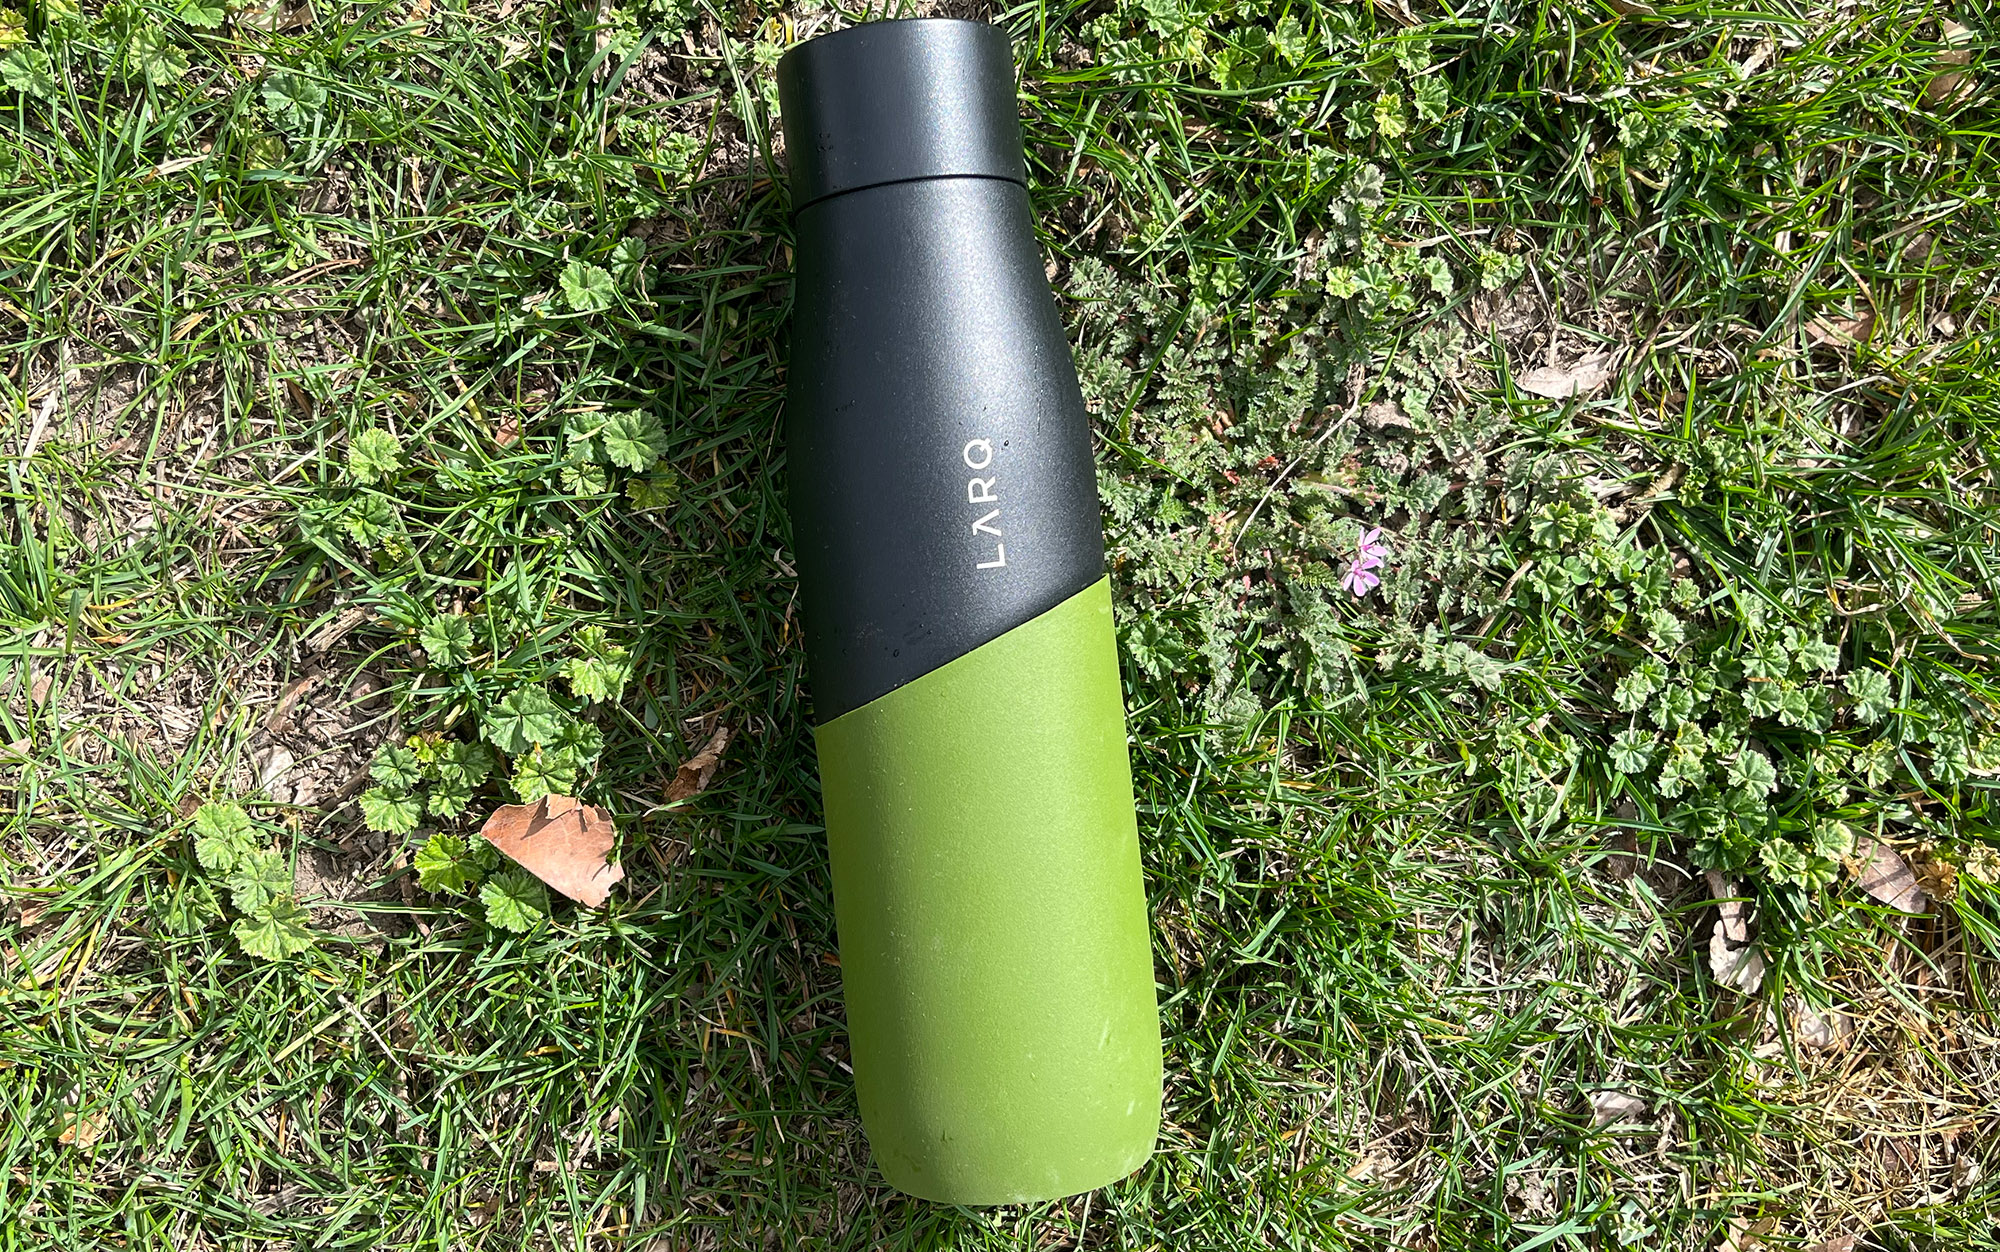 I tested the Larq Bottle Movement PureVis.